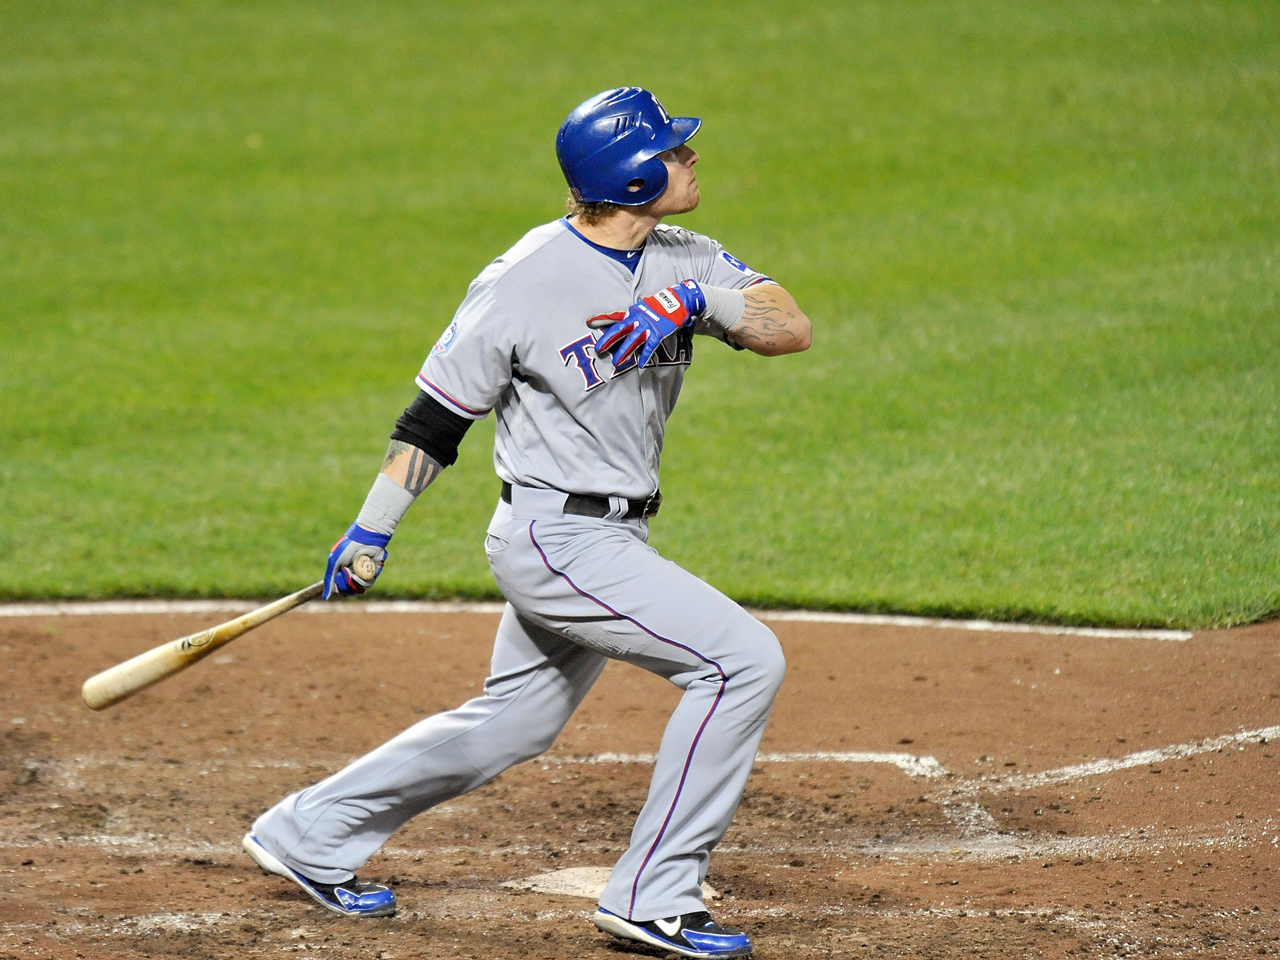 Josh Hamilton among 16 players to hit 4 homers in game